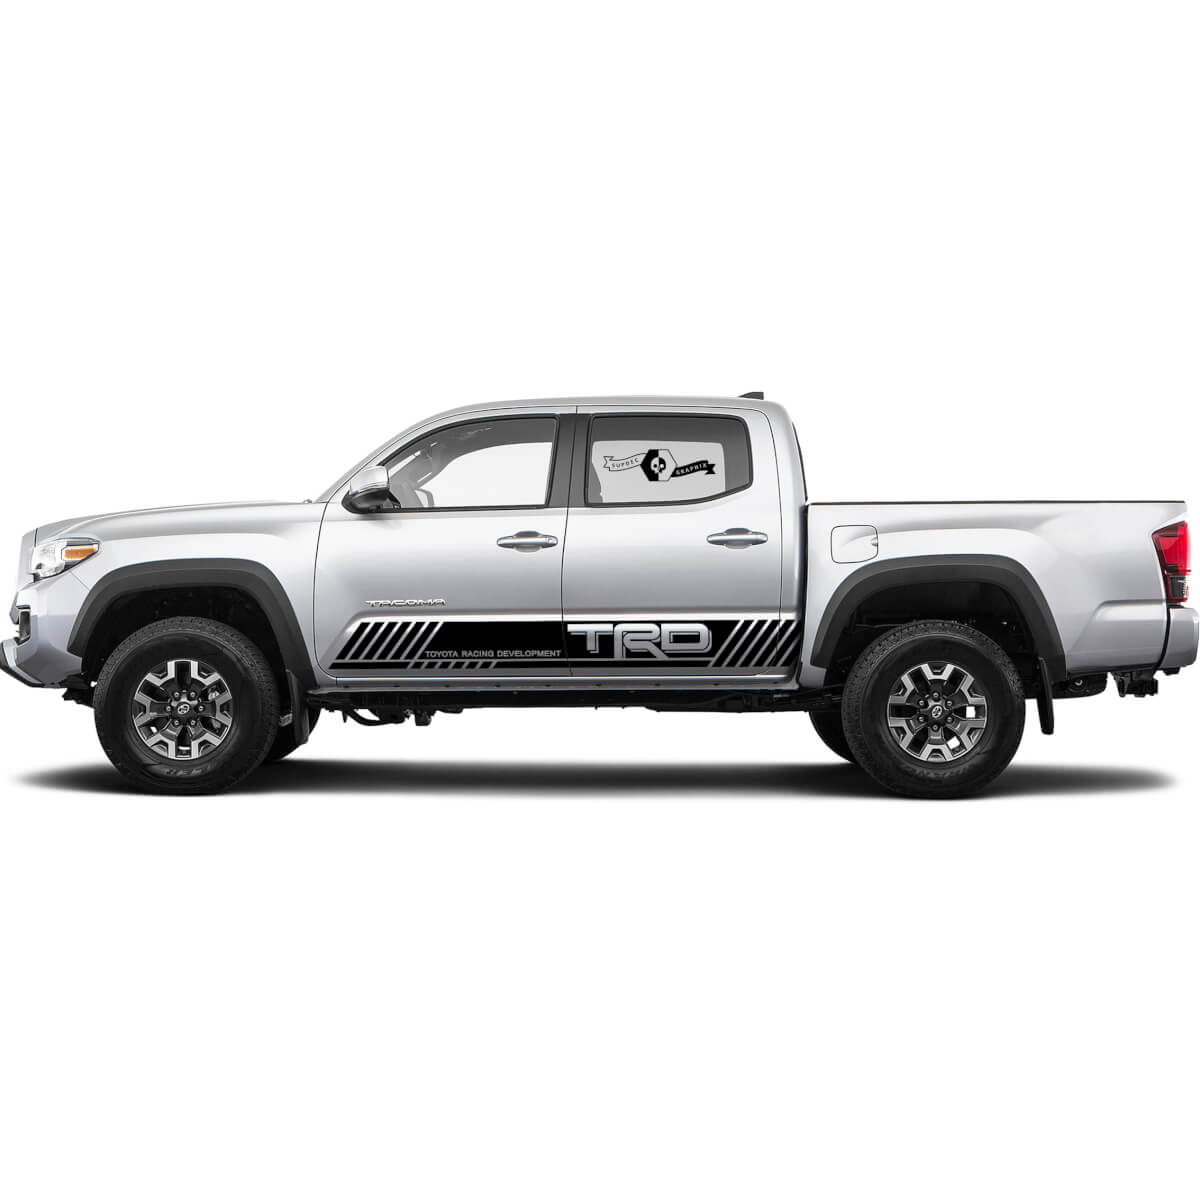 TRD Toyota Racing Style for Rocker Panel Decals Stickers for Tacoma FJ Cruiser Tundra Hilux 4Runner 3